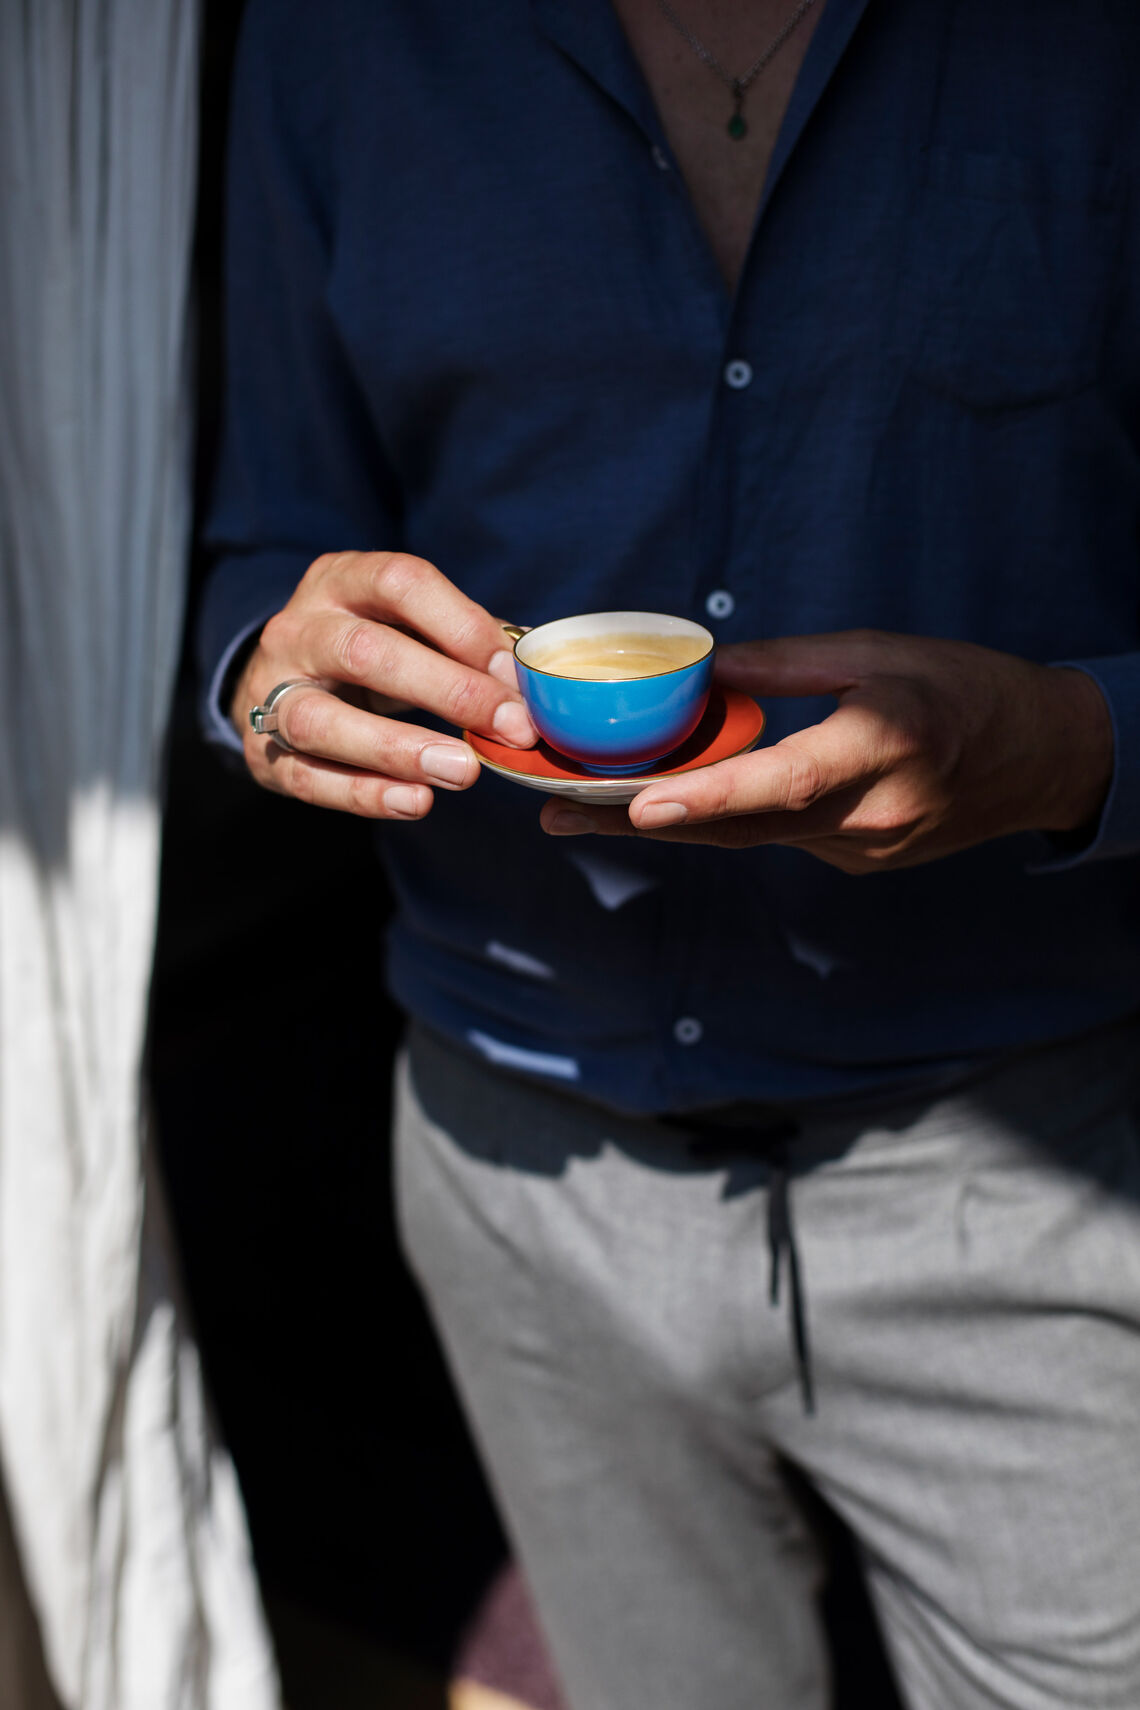 Markus Tenbusch holds a blue espresso cup from the URBINO collection by KPM